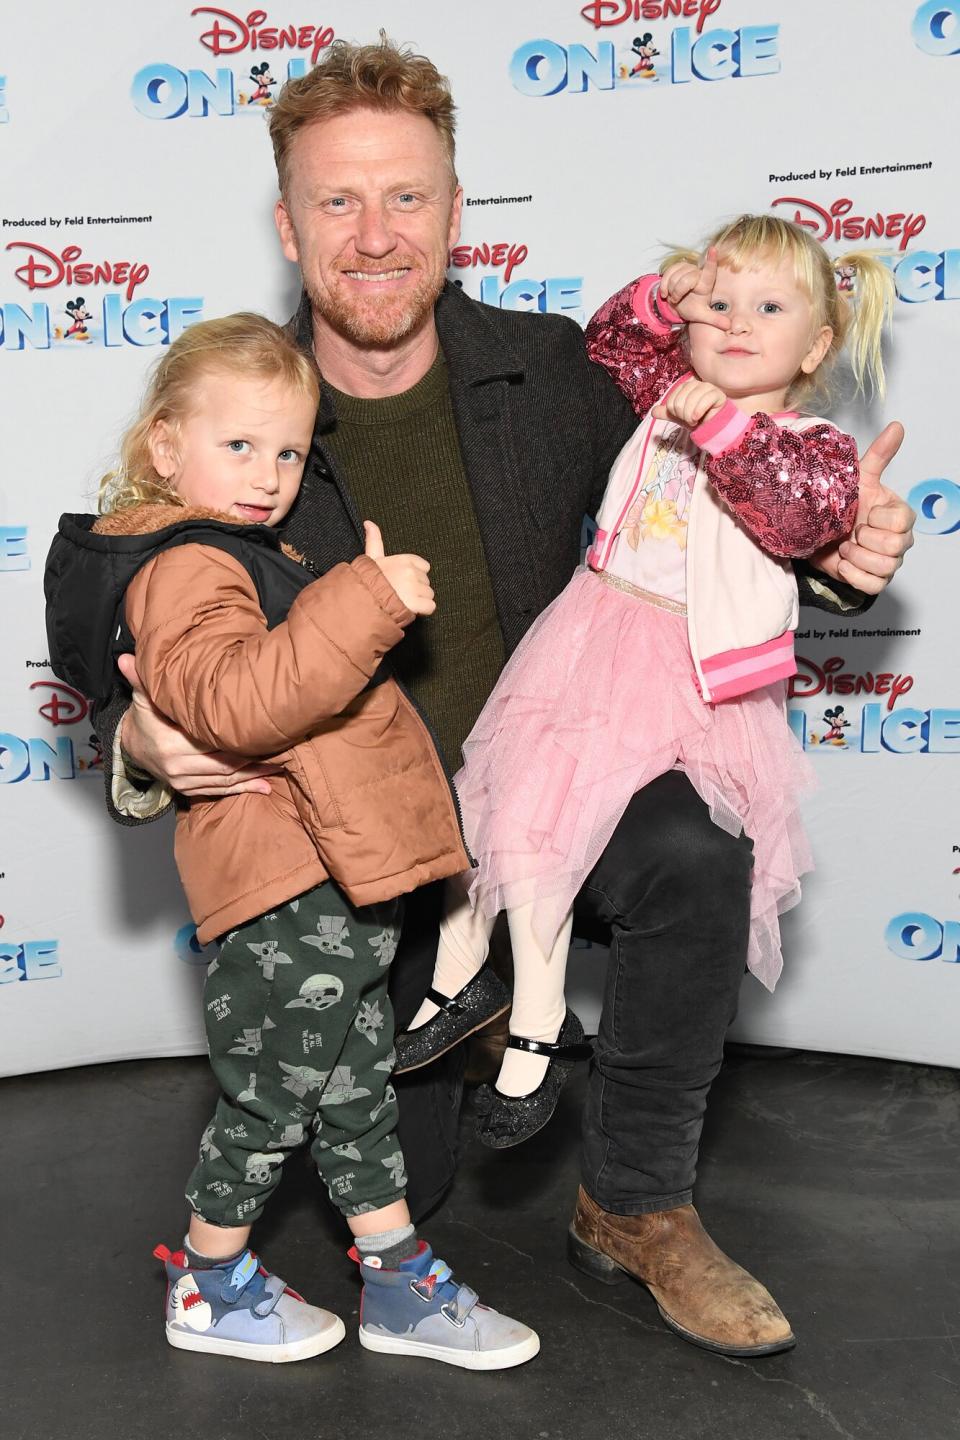 Kevin McKidd (C) and kids arrive as Disney On Ice presents Road Trip Adventures at Crypto.com Arena on December 09, 2022 in Los Angeles, California.